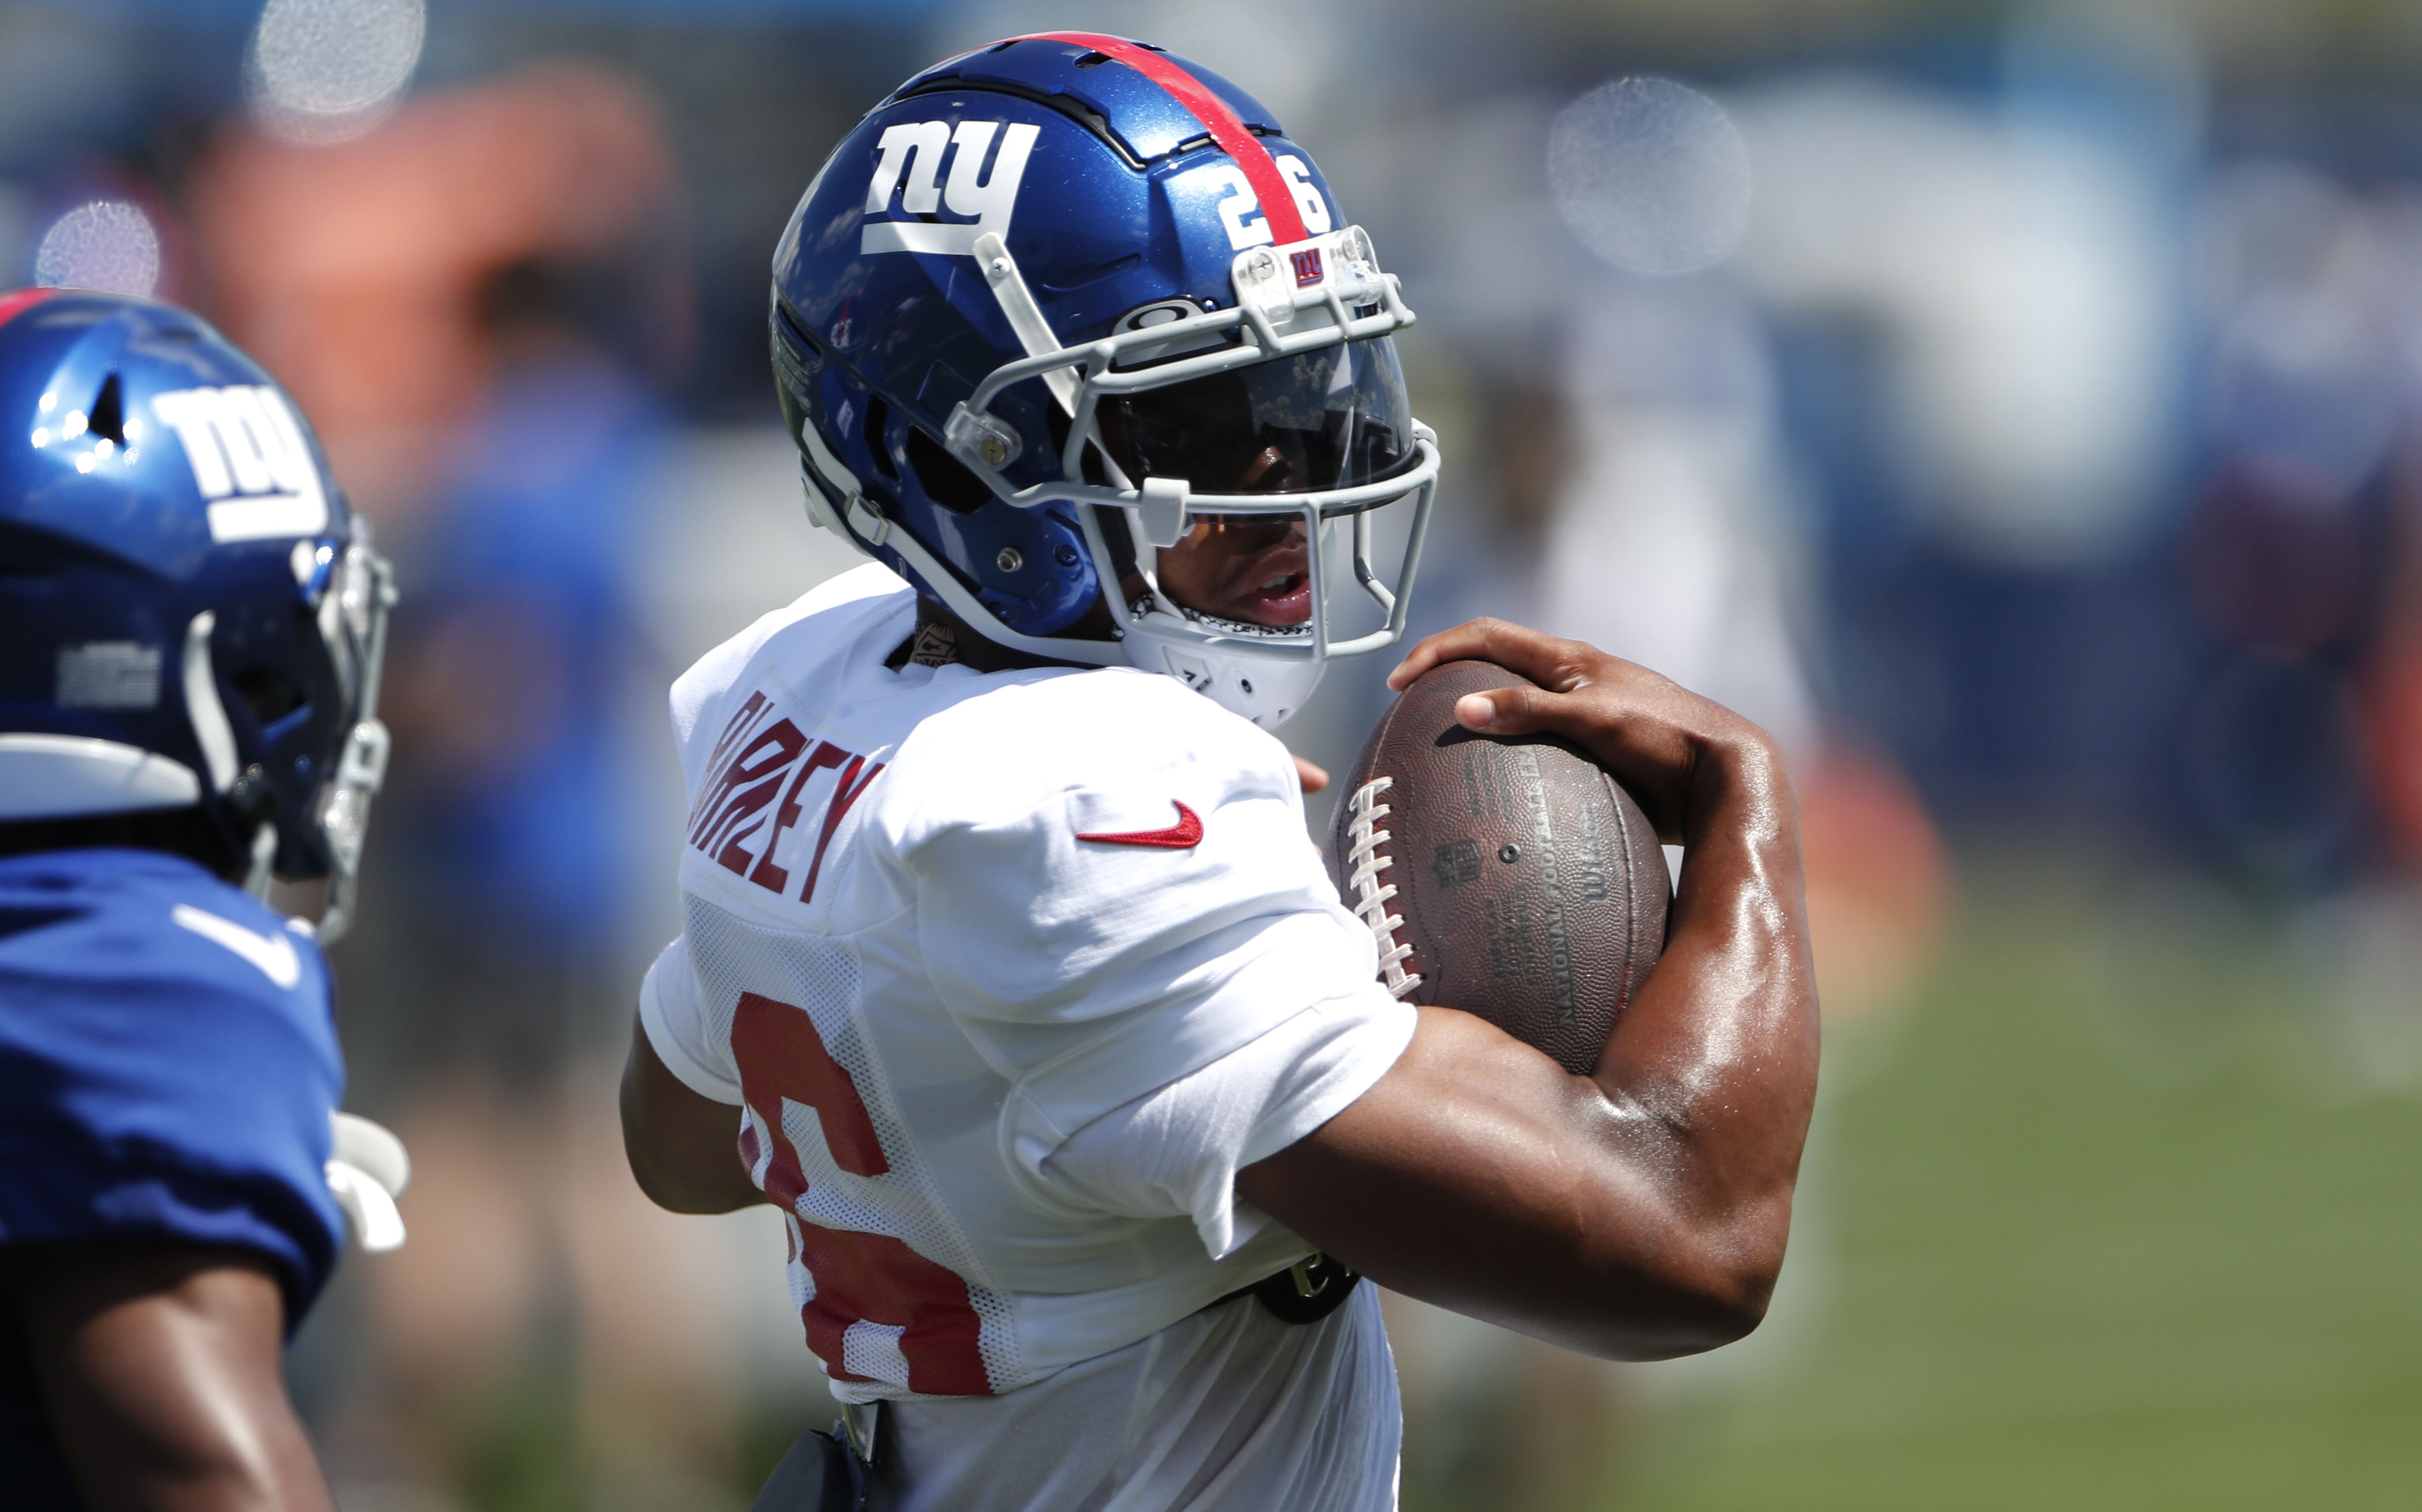 Saquon Barkley runs with the ball during a recent Giants practice.